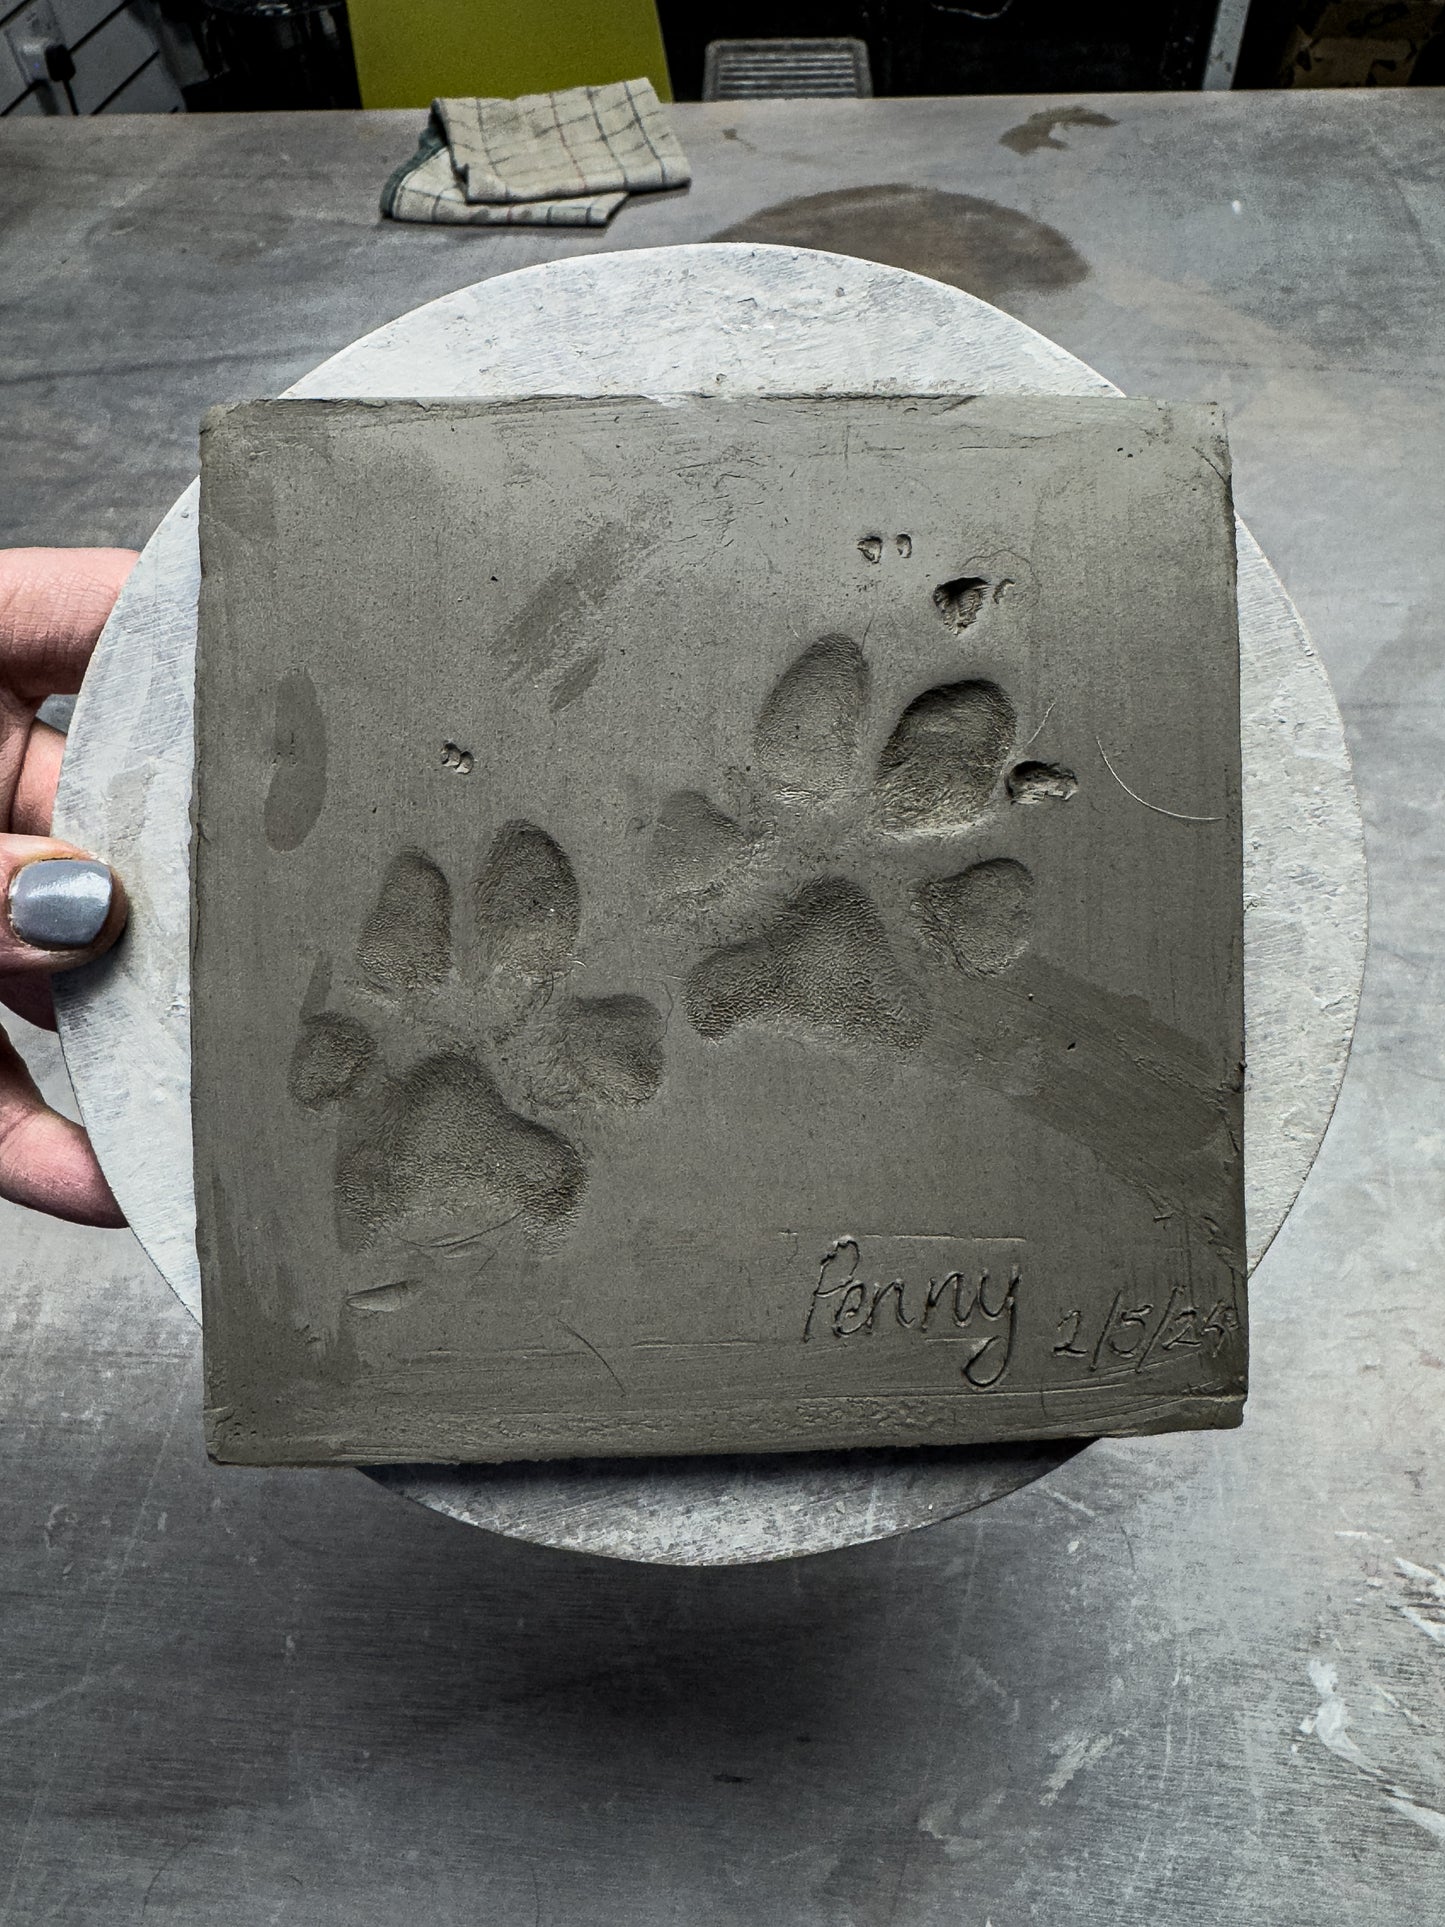 Dog Paw Prints in Clay